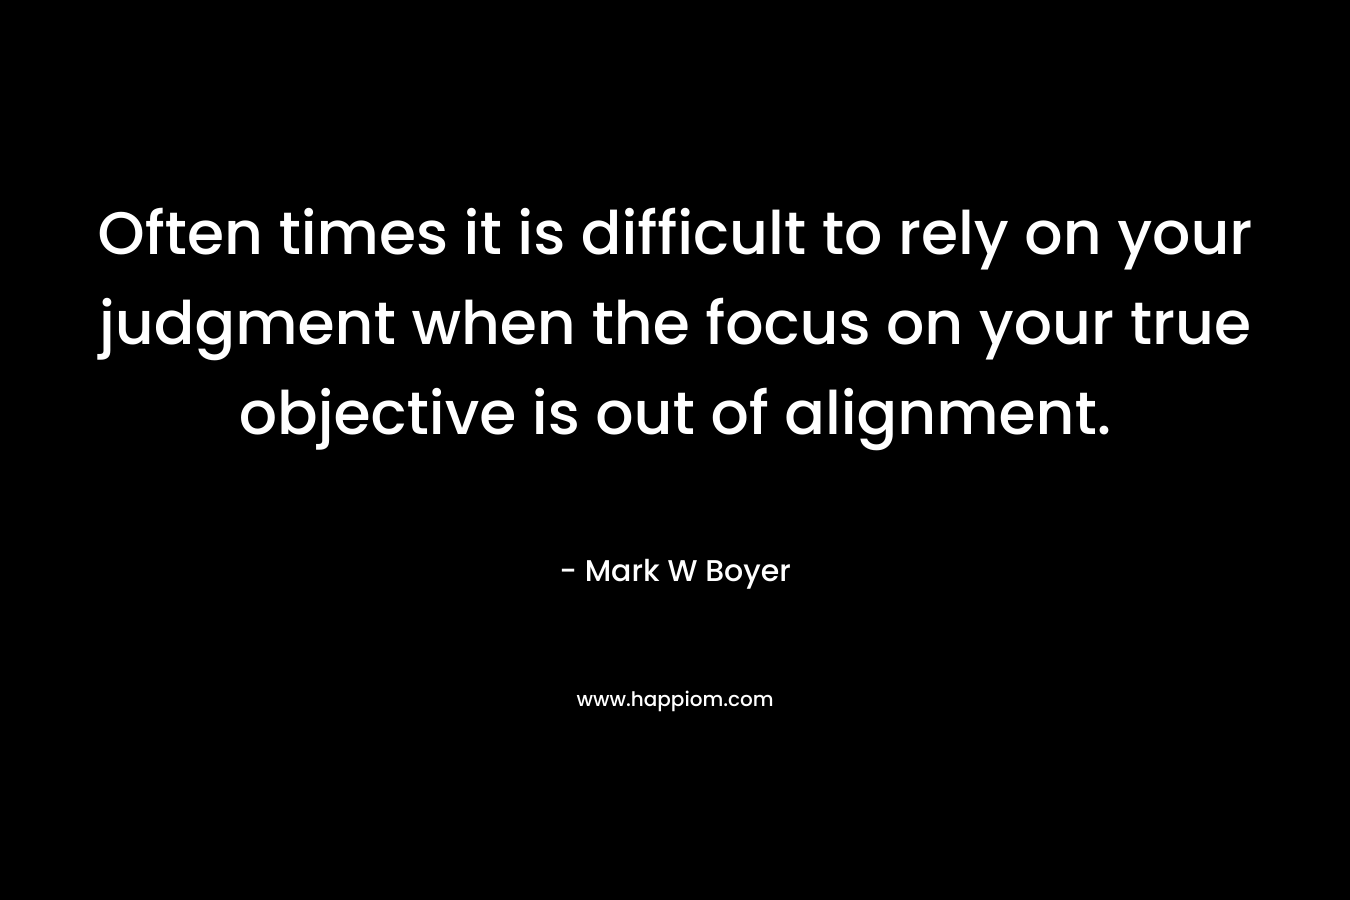 Often times it is difficult to rely on your judgment when the focus on your true objective is out of alignment.